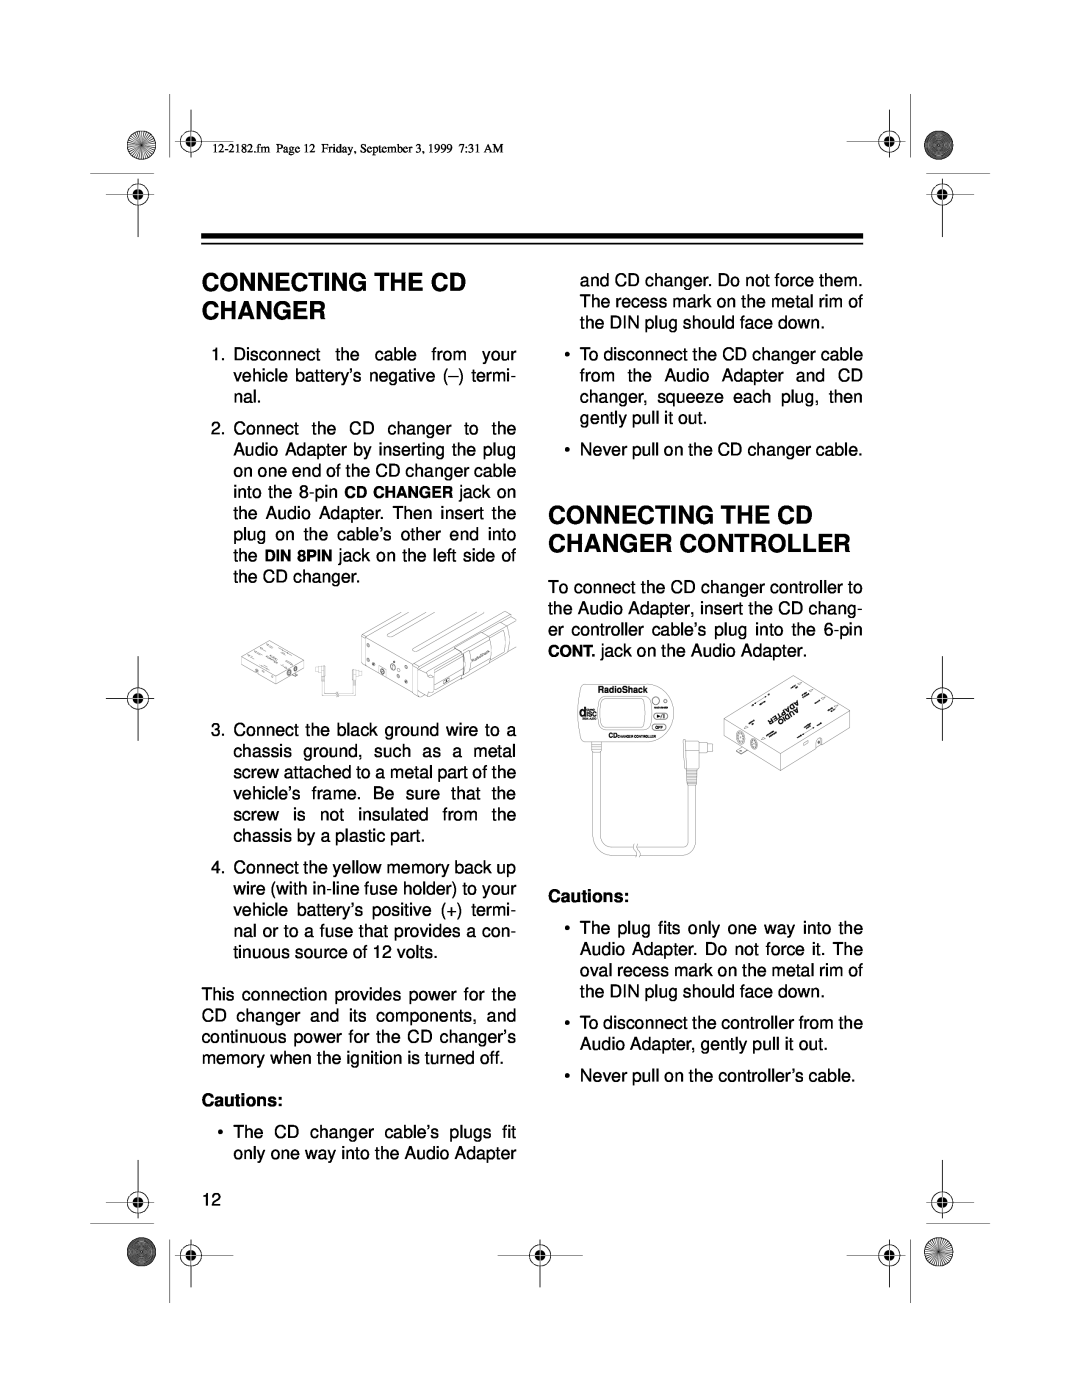 Radio Shack 10 Disc CD Changer owner manual Connecting The Cd Changer Controller 